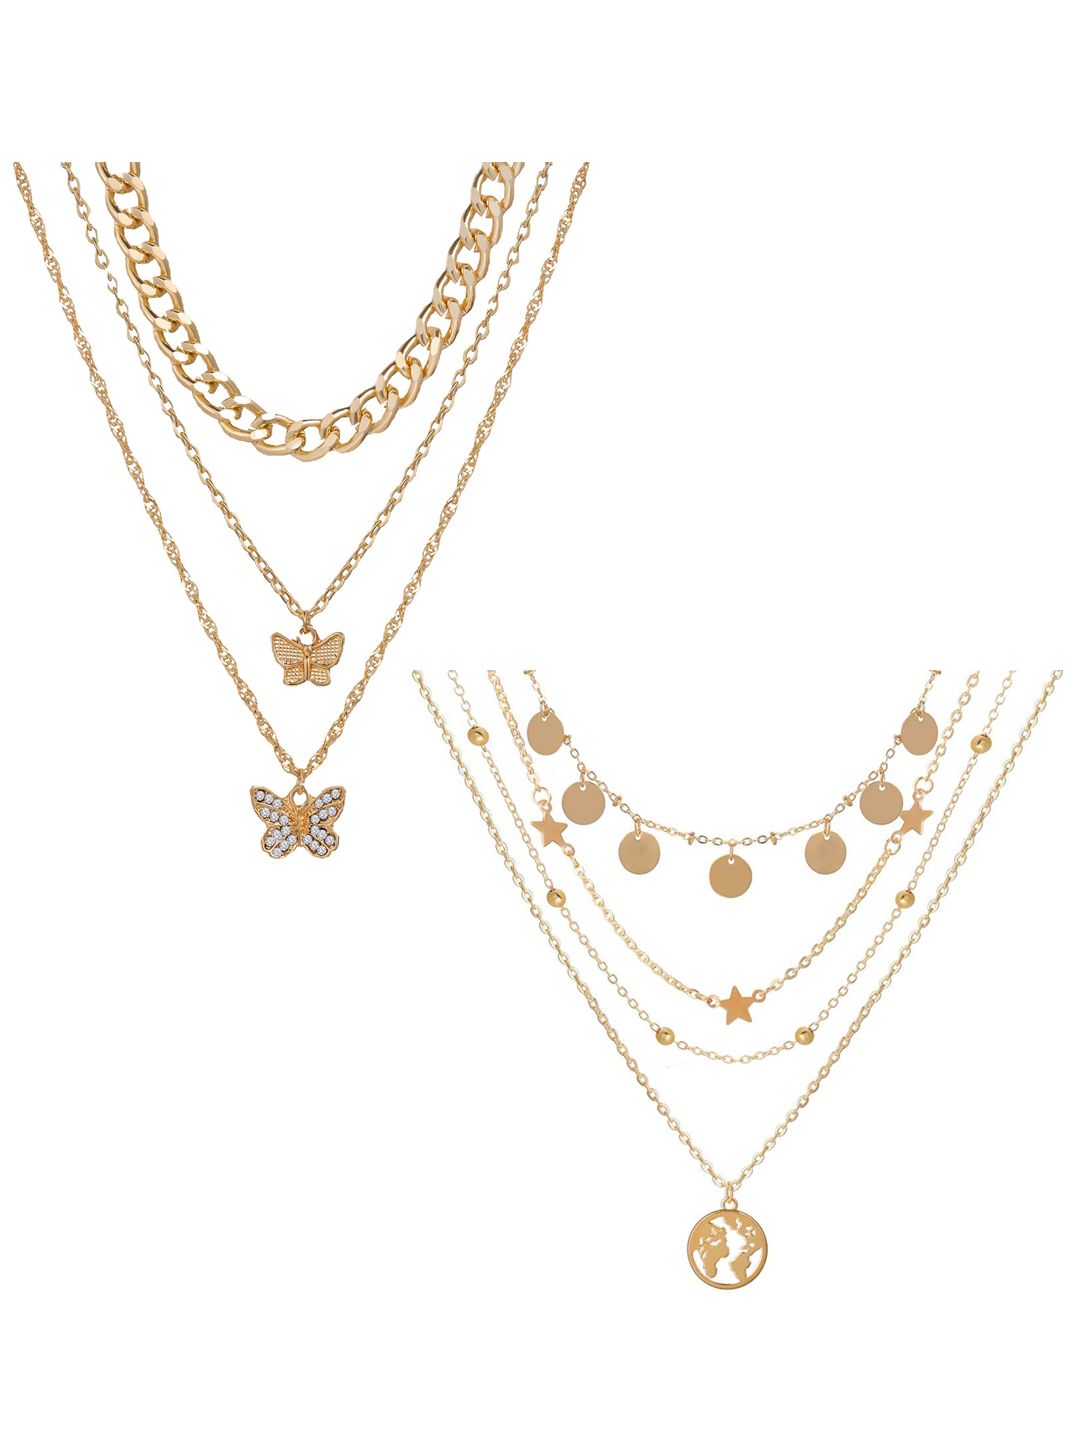 Vembley Set Of 2 Gold-Plated Layered Star World & Butterfly Necklace Price in India